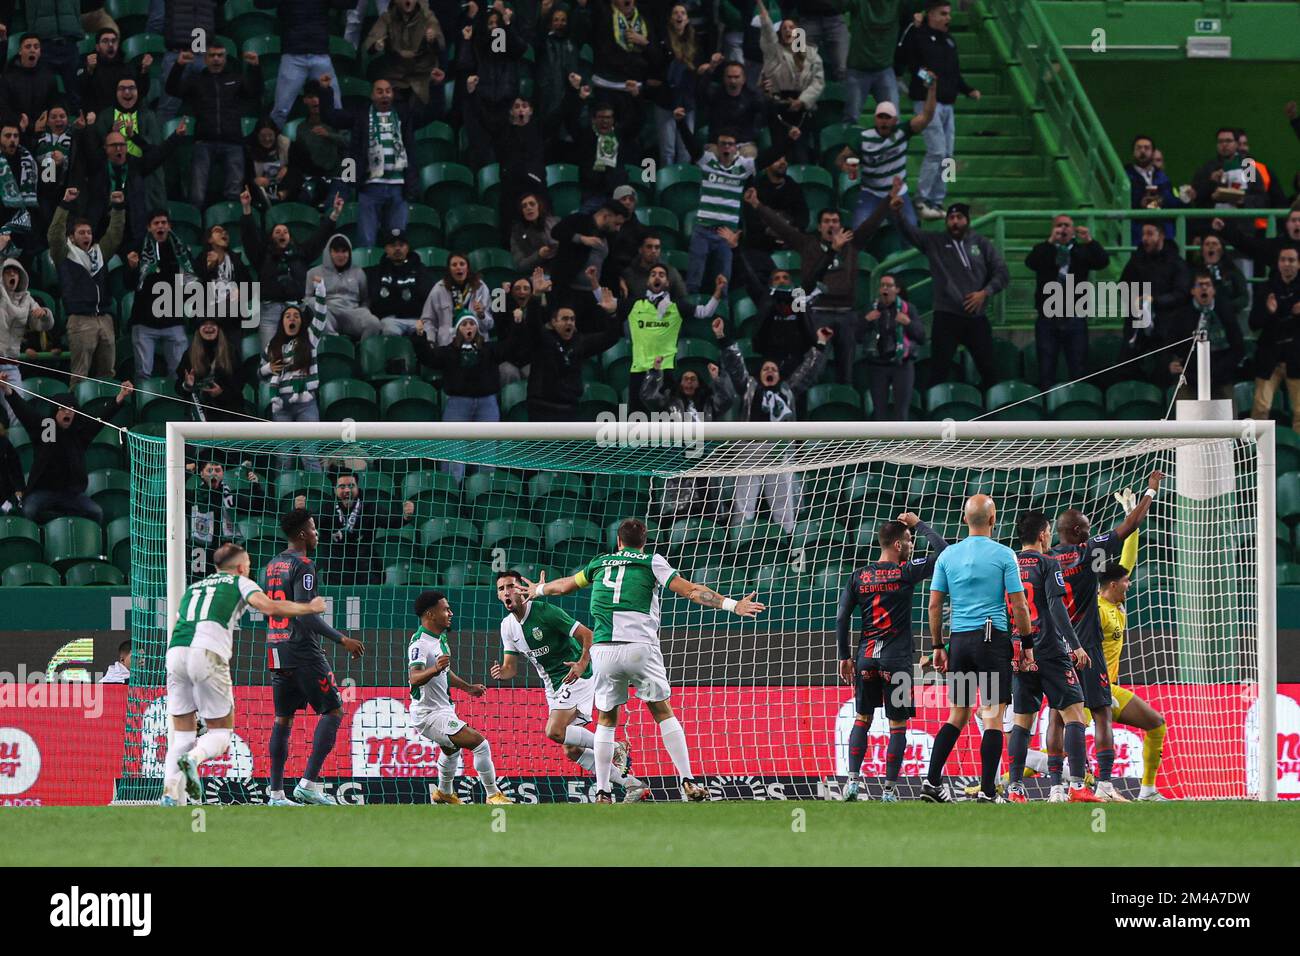 Lisbon, Portugal. 19th Dec, 2022. Goncalo Inacio (L4) of Sporting CP celebrates after scoring a goal during the Allianz Cup 2022/2023 match between Sporting CP and SC Braga at Estadio Jose Alvalade.(Final score: Sporting CP 5:0 SC Braga) Credit: SOPA Images Limited/Alamy Live News Stock Photo